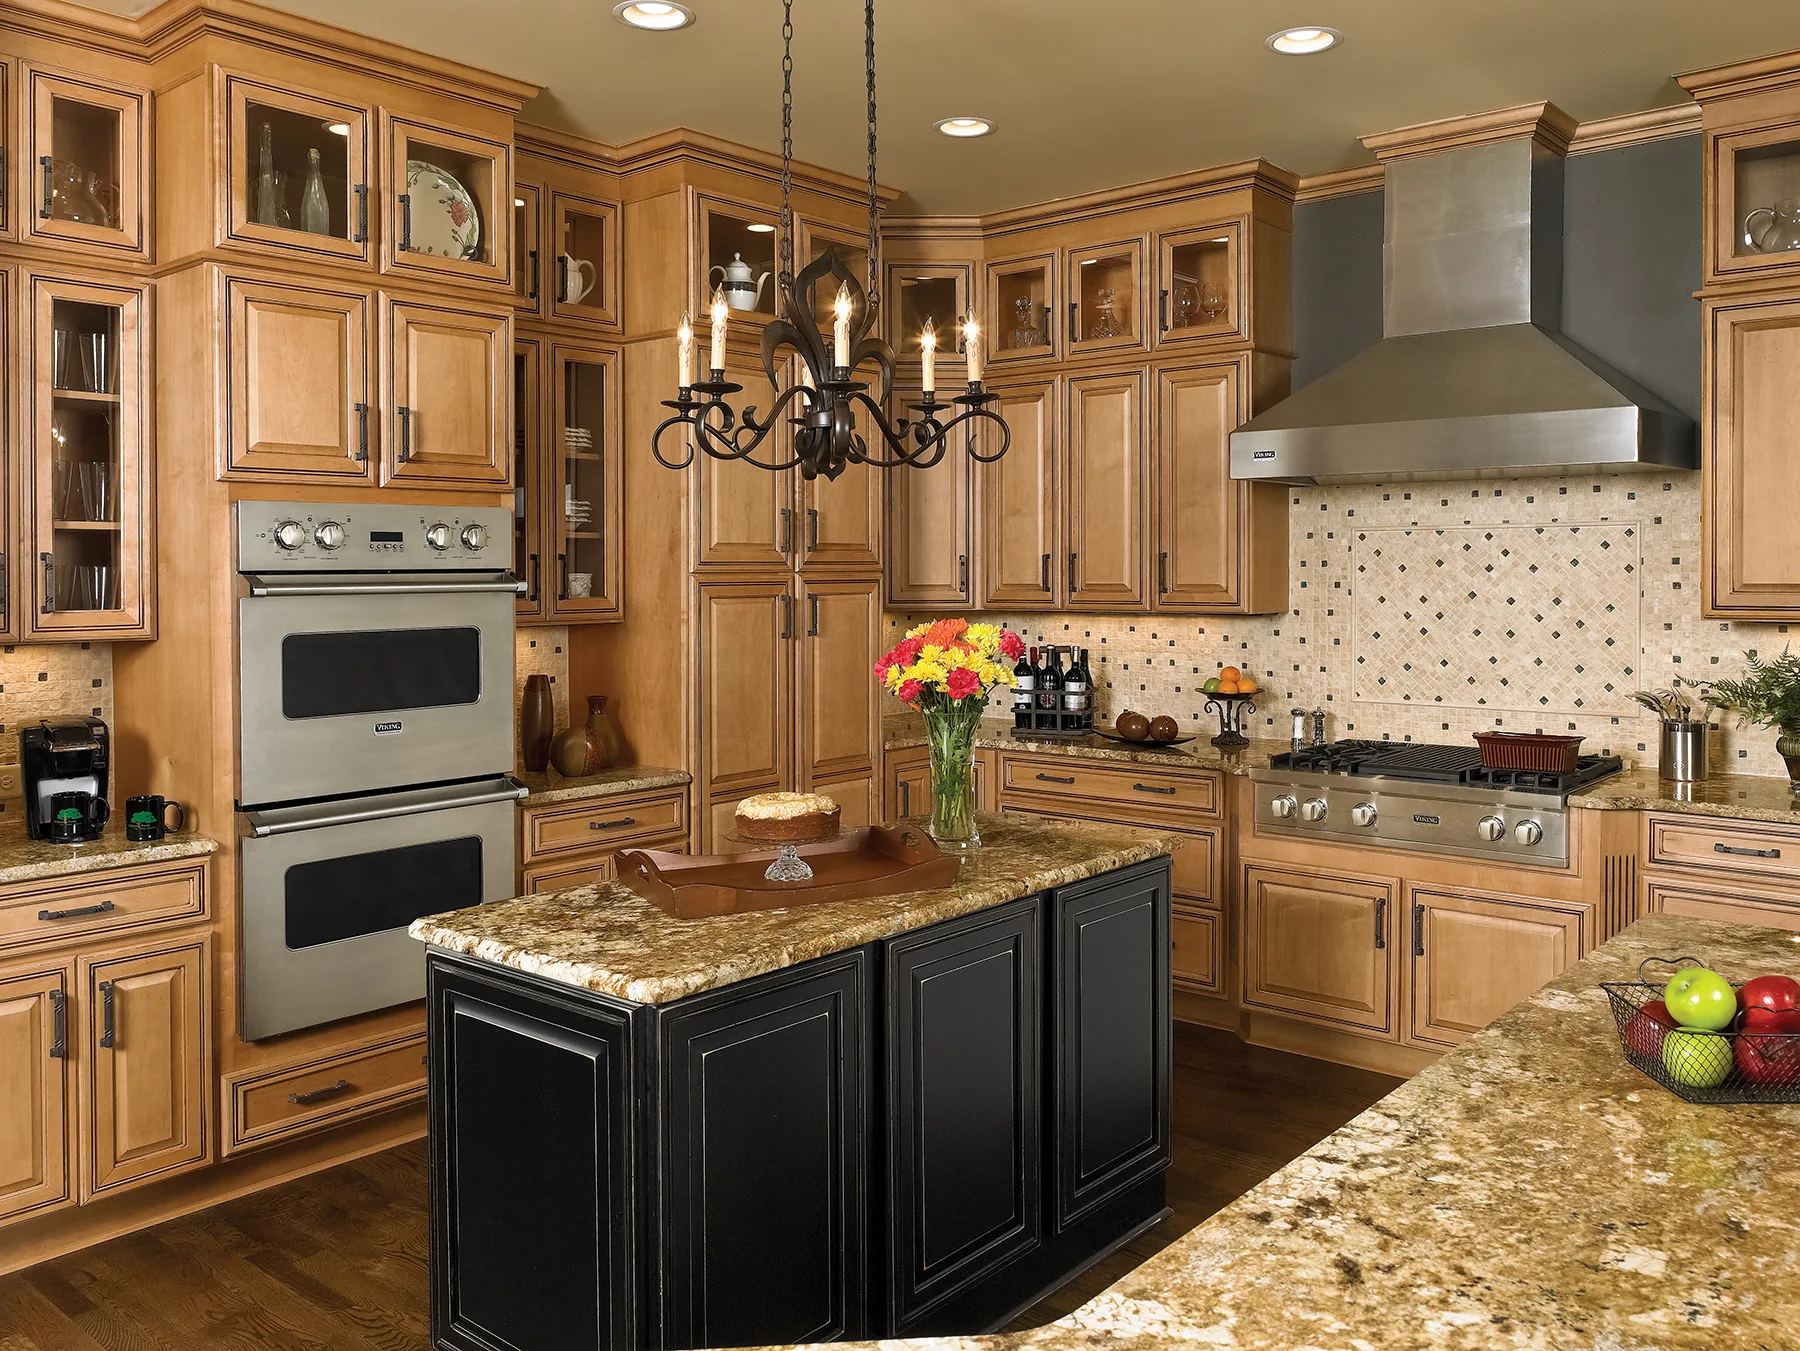 Semi Custom Cabinets Can Be Customized For You With One Of Several Carefully Applied Glazes